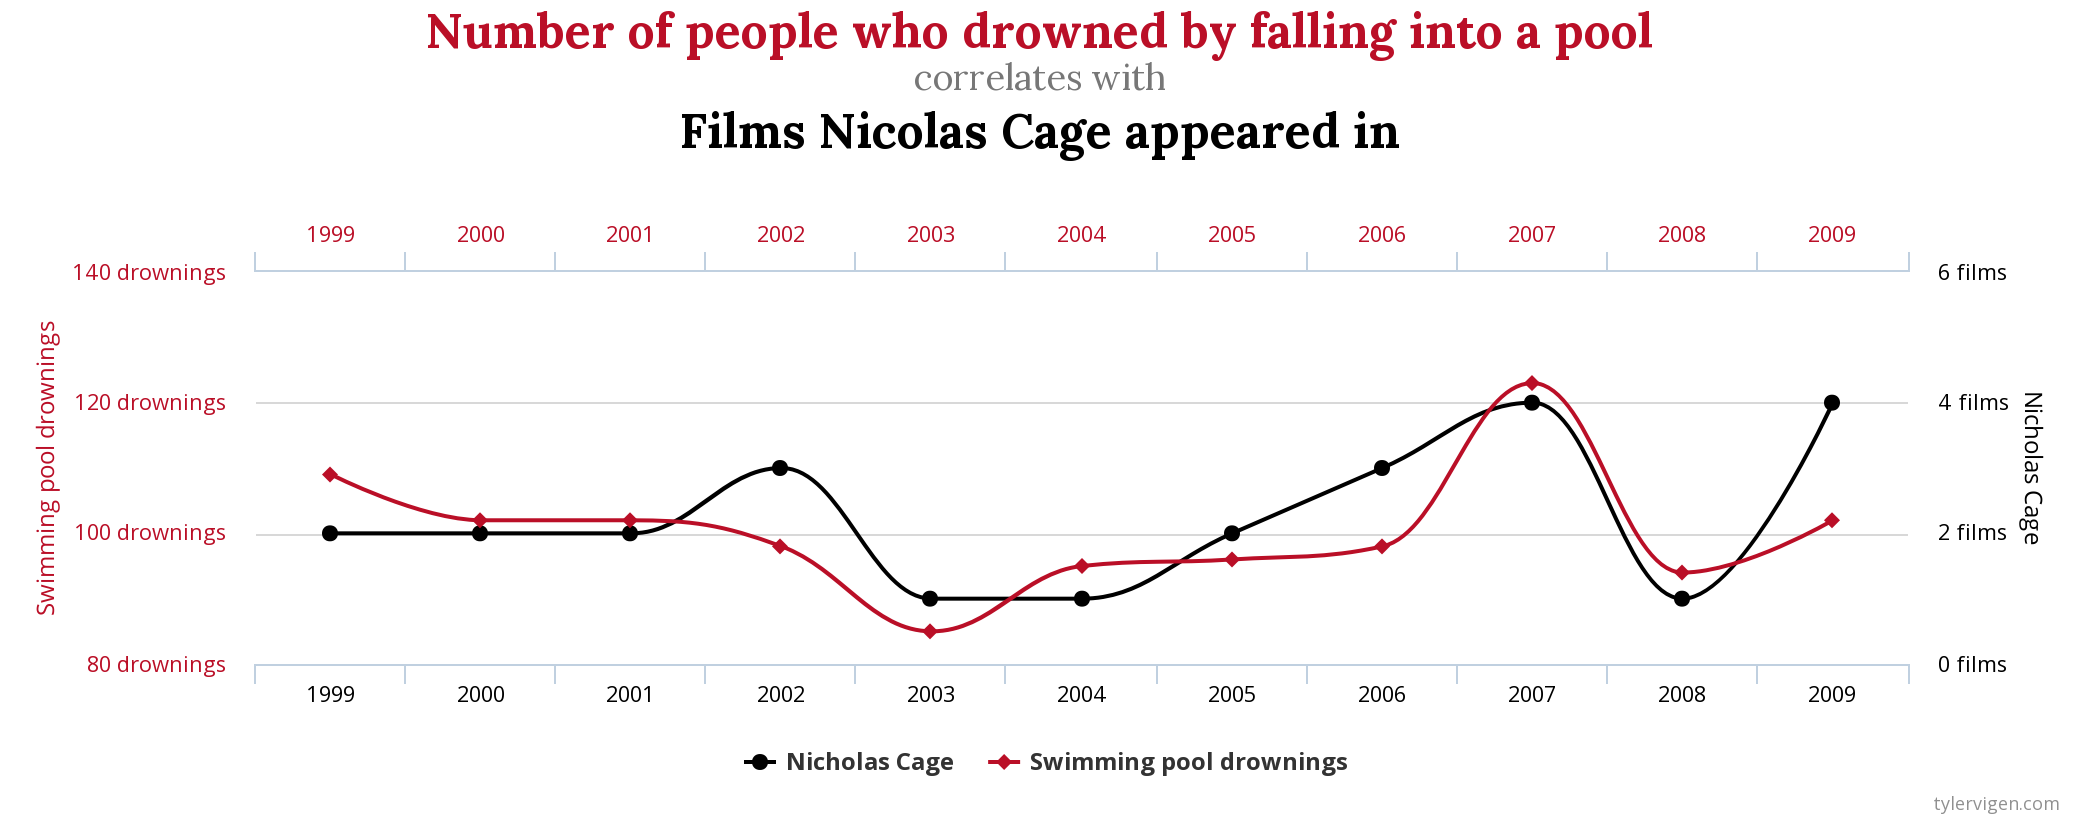 Is Nicholas Cage a secret pool murderer? Our libel lawyers say 'No'.